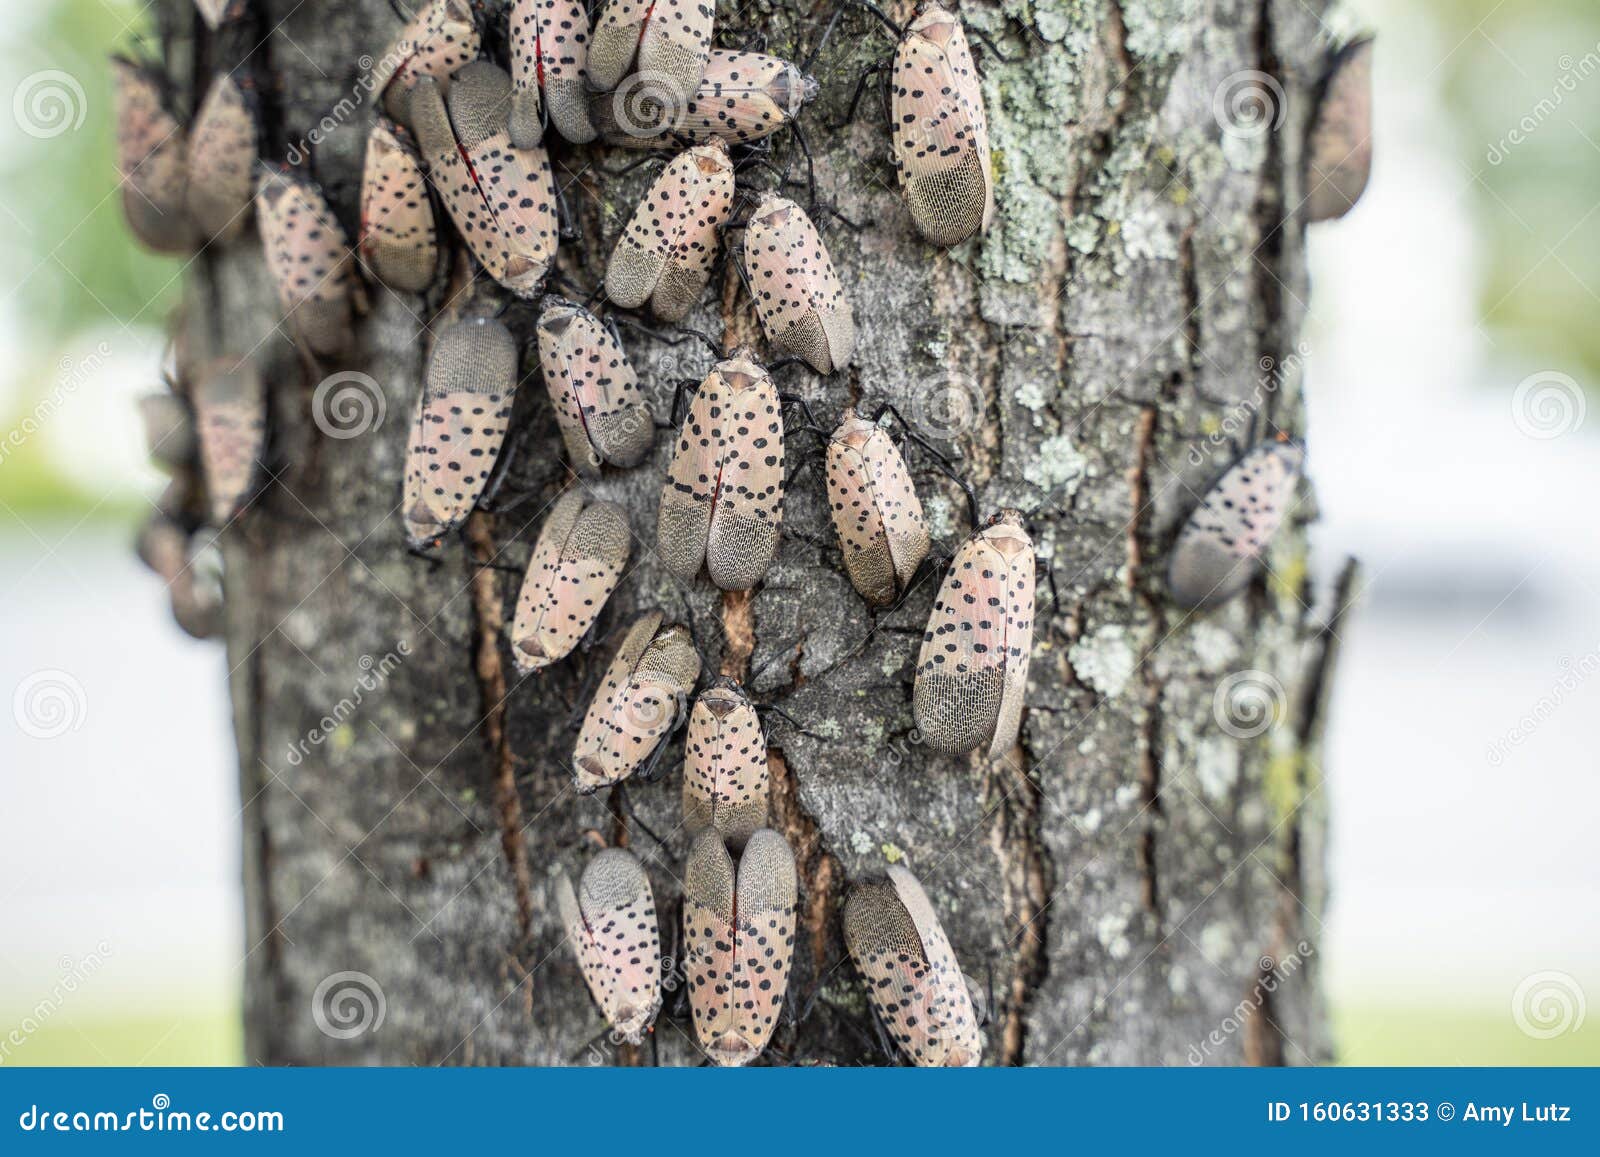 spotted lanternflies or lanternfly lycorma delicatula on tree, berks county, pennsylvania